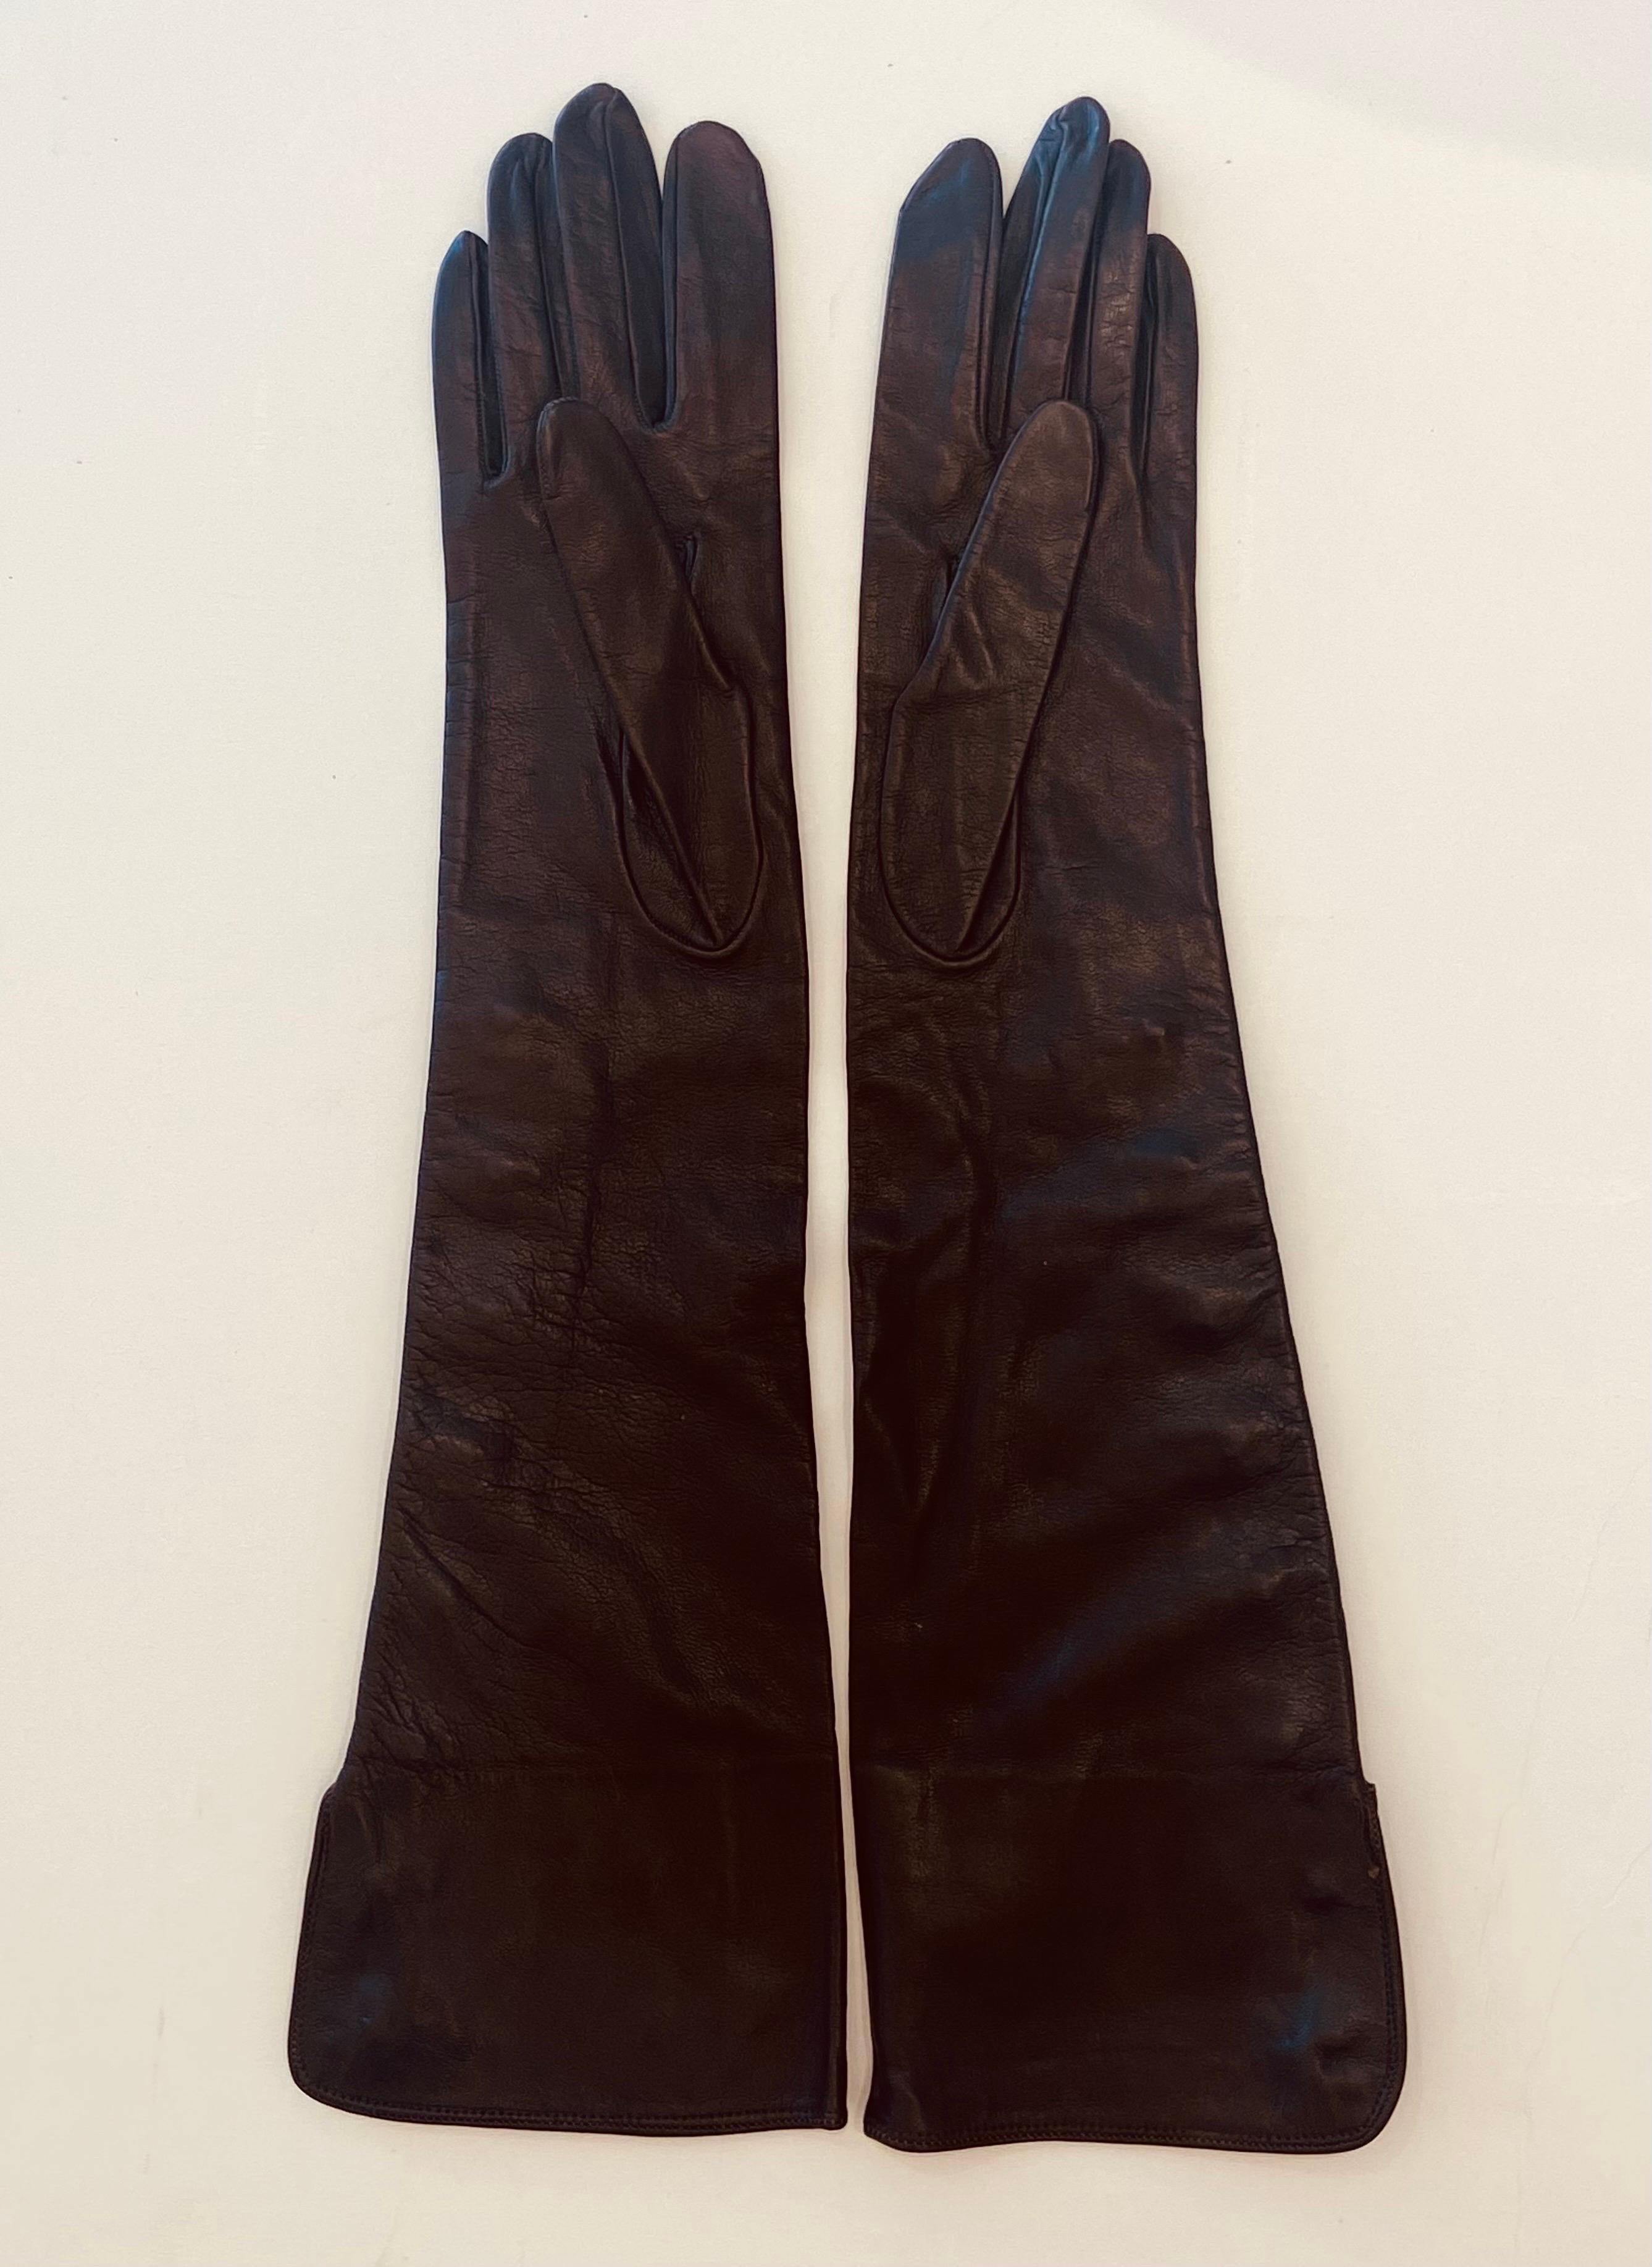 Chanel buttery soft chocolate brown lambskin leather 8 button elbow length gloves marked size 7.
These beautiful gloves are lined in off white silk, they look barely worn. The outside of each glove has 8 Chanel gold logo buttons, the 2 top buttons